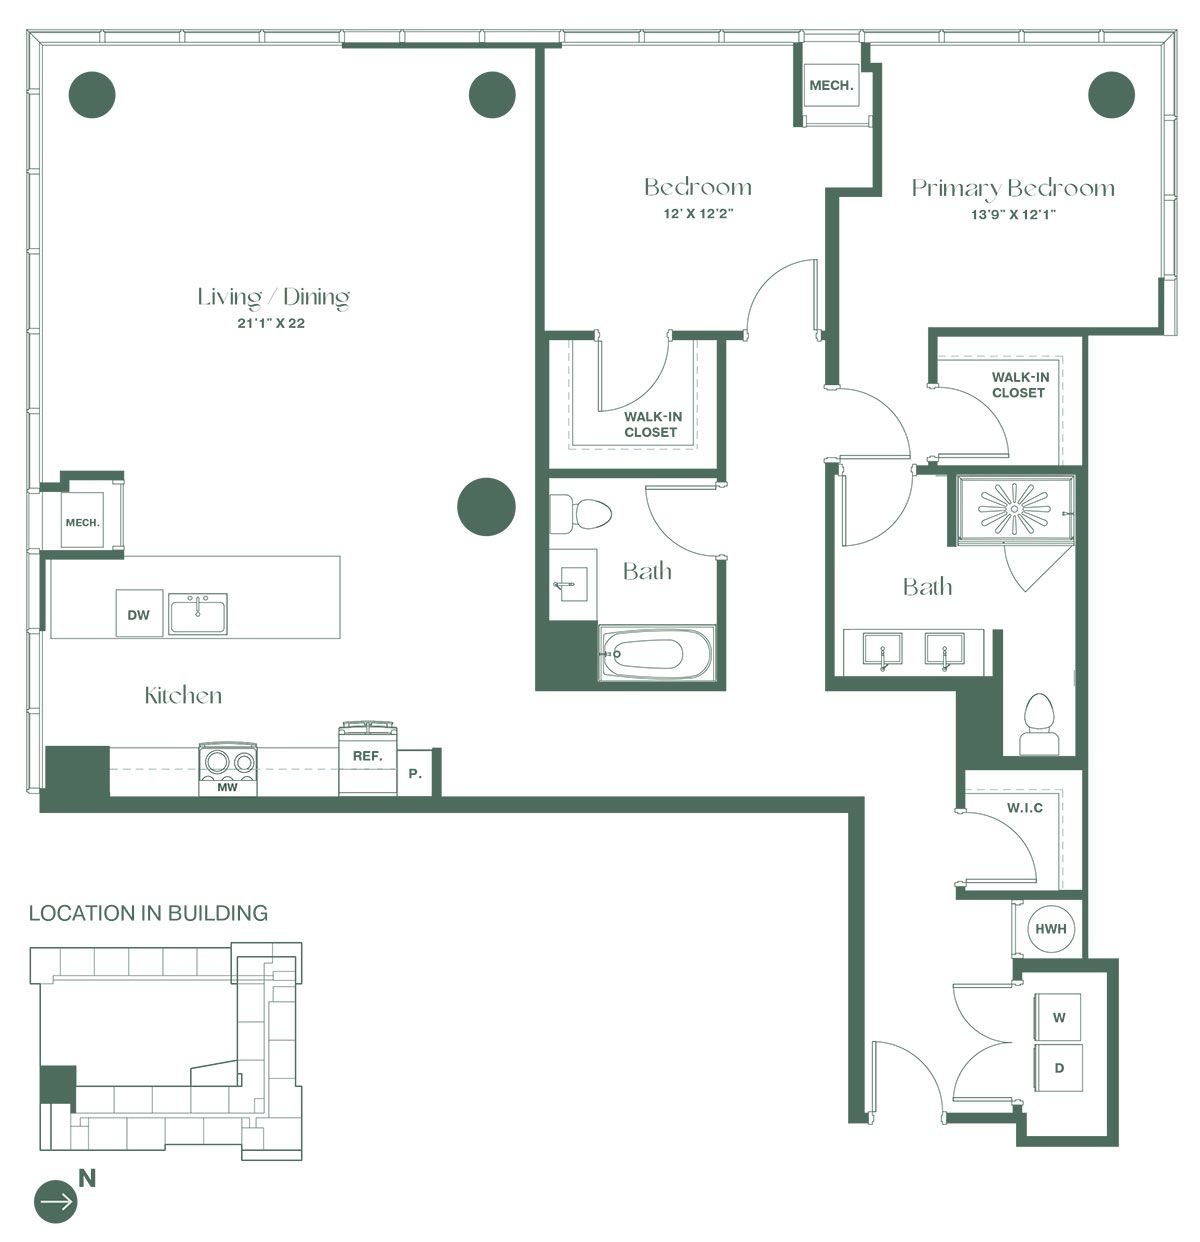 This floorplan for a two-bedroom, two-bathroom apartment at RVR at Xchange begins with an entry leading to a fully equipped kitchen including a dishwasher and pantry and a spacious living and dining room area. Continuing straight down the hallway there is a full bathroom on the left with a large walk-in closet, entrance to the primary bedroom featuring a walk-in closet, and a full bathroom.